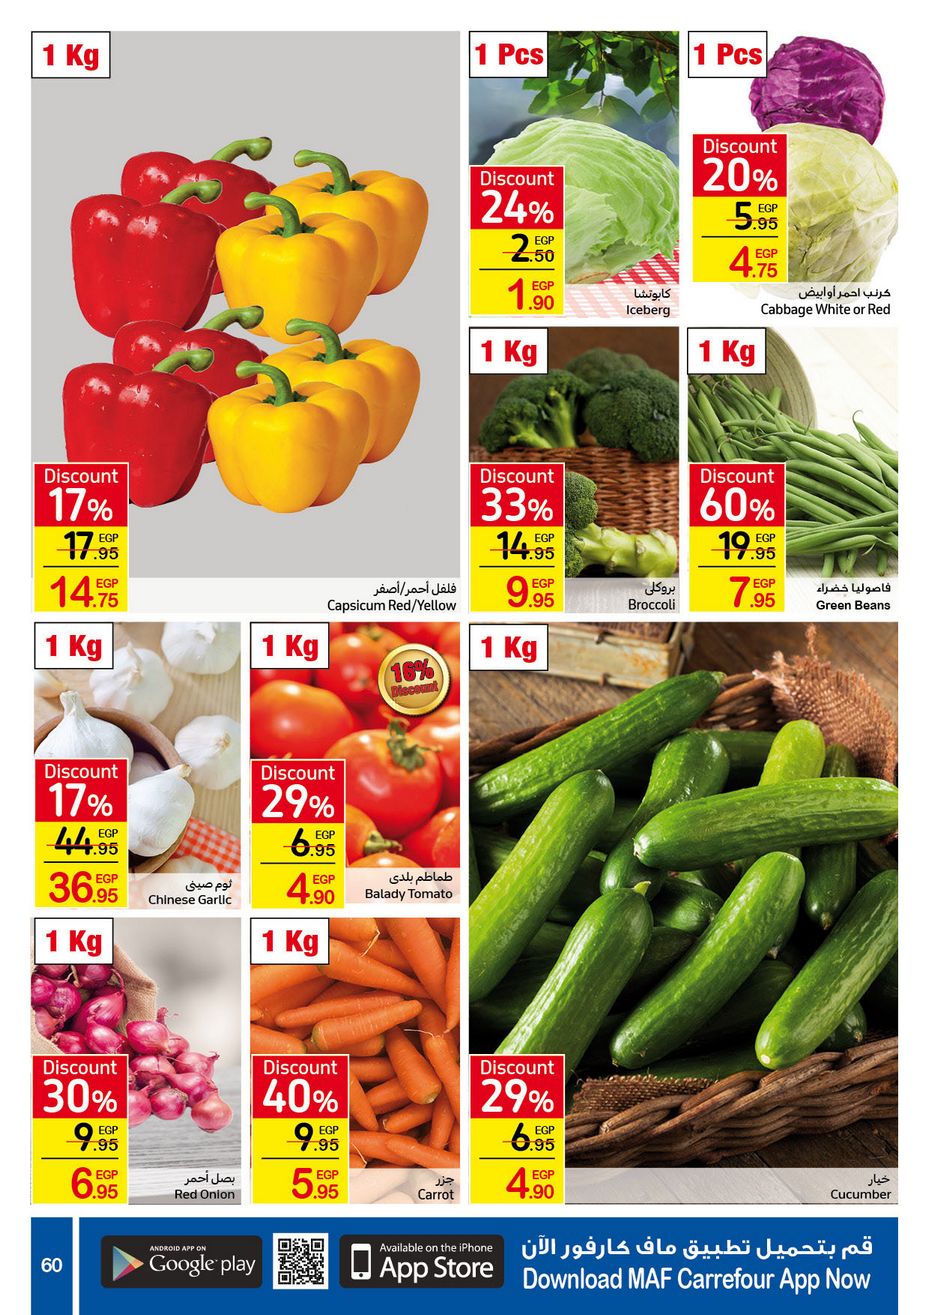 Carrefour Anniversary Offers till 18/2/2021 | Carrefour Egypt 61